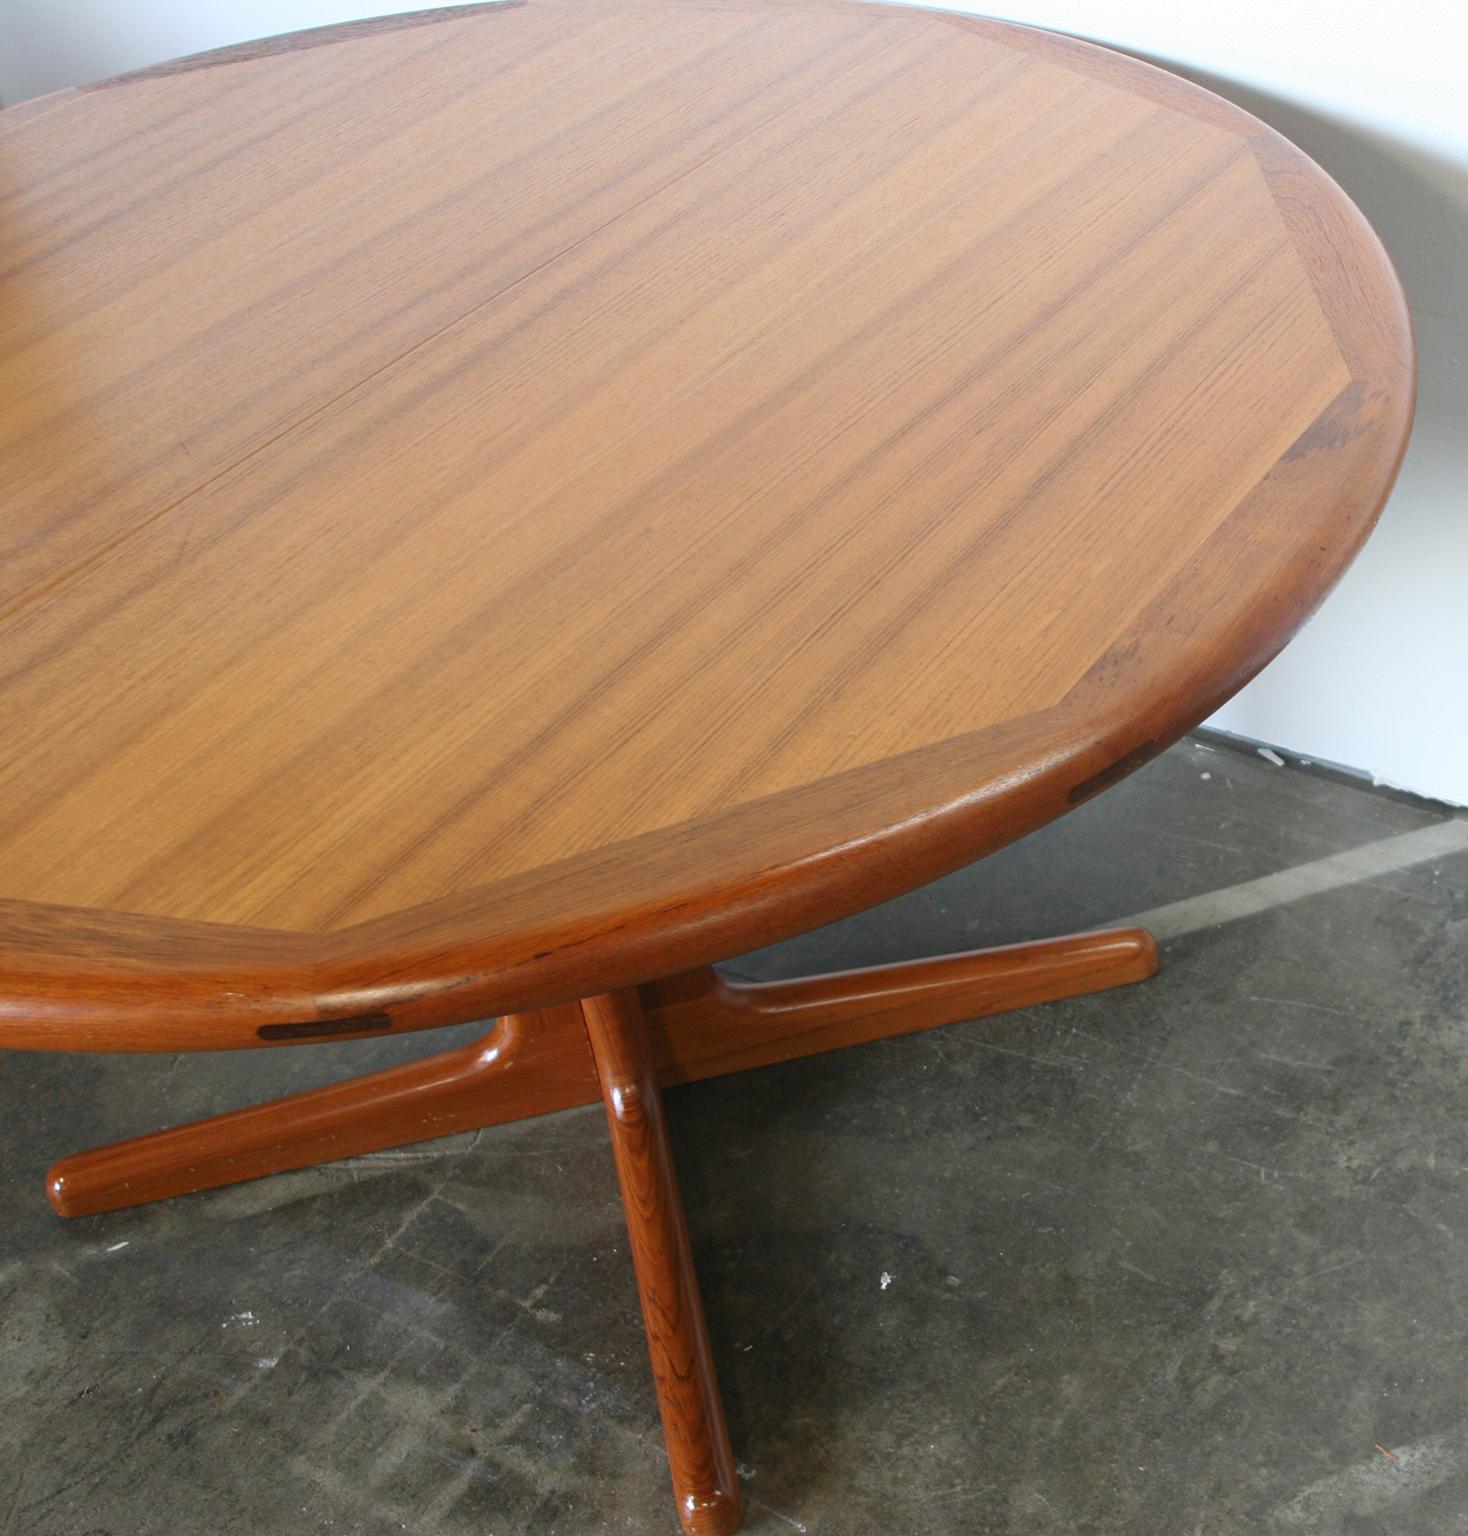 Midcentury Edward Valentinsen Teak Expandable sculptural round dining table with 2 leaves. This is a Beautiful table set Made in Denmark by Funiturefactory Ringe. Amazing rosewood details in rounded edge of table. Made circa 1960 all teak with solid